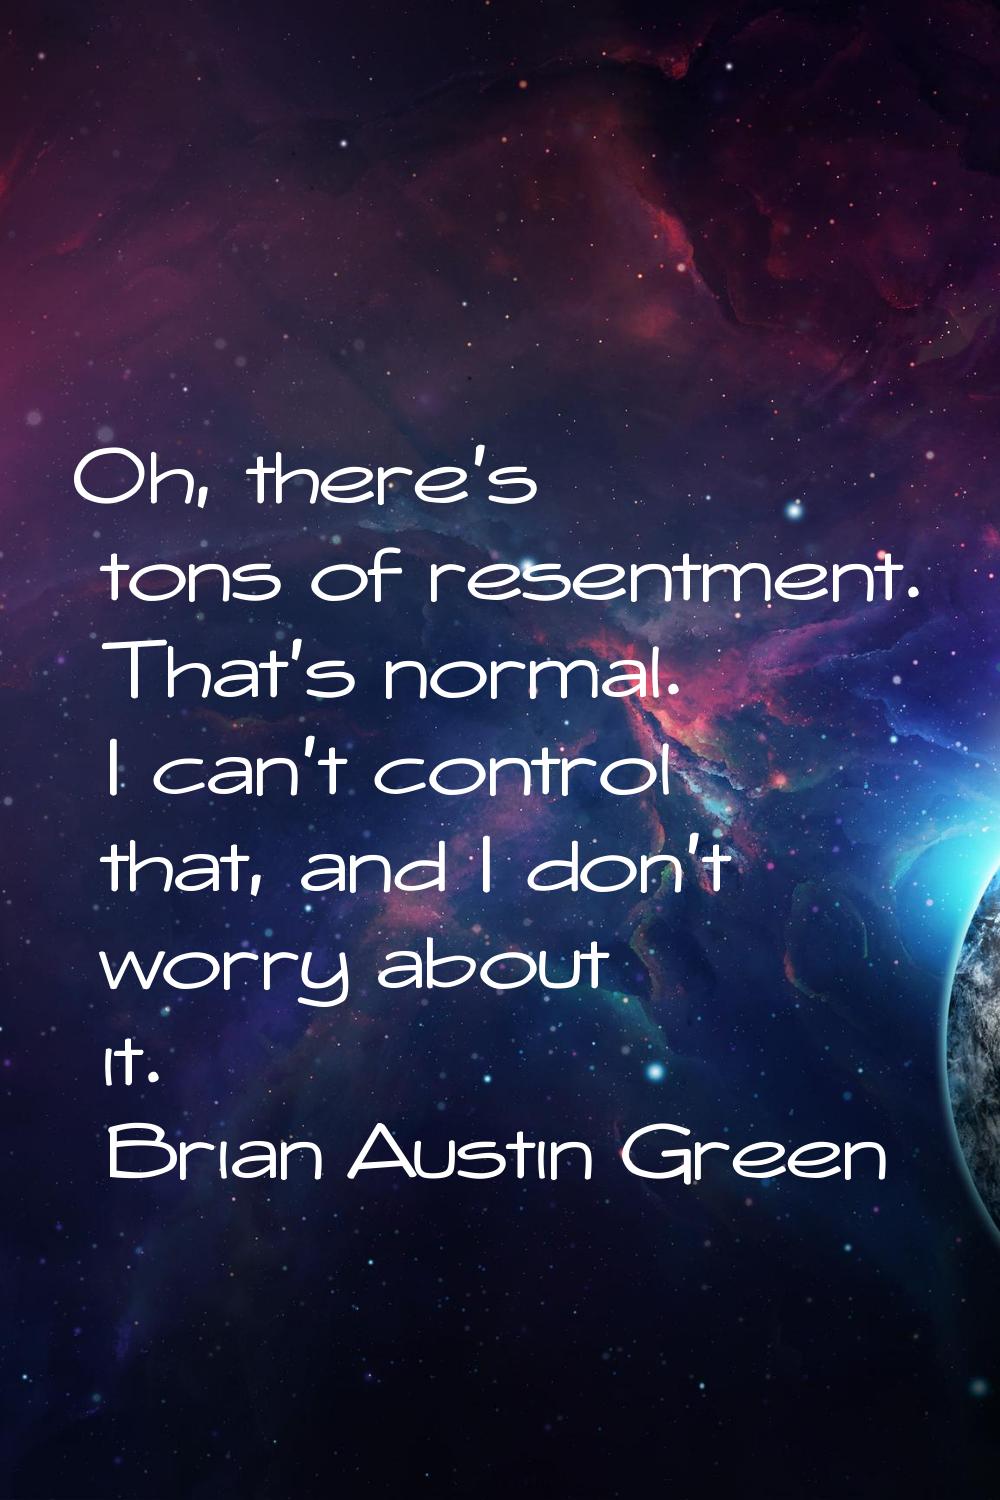 Oh, there's tons of resentment. That's normal. I can't control that, and I don't worry about it.